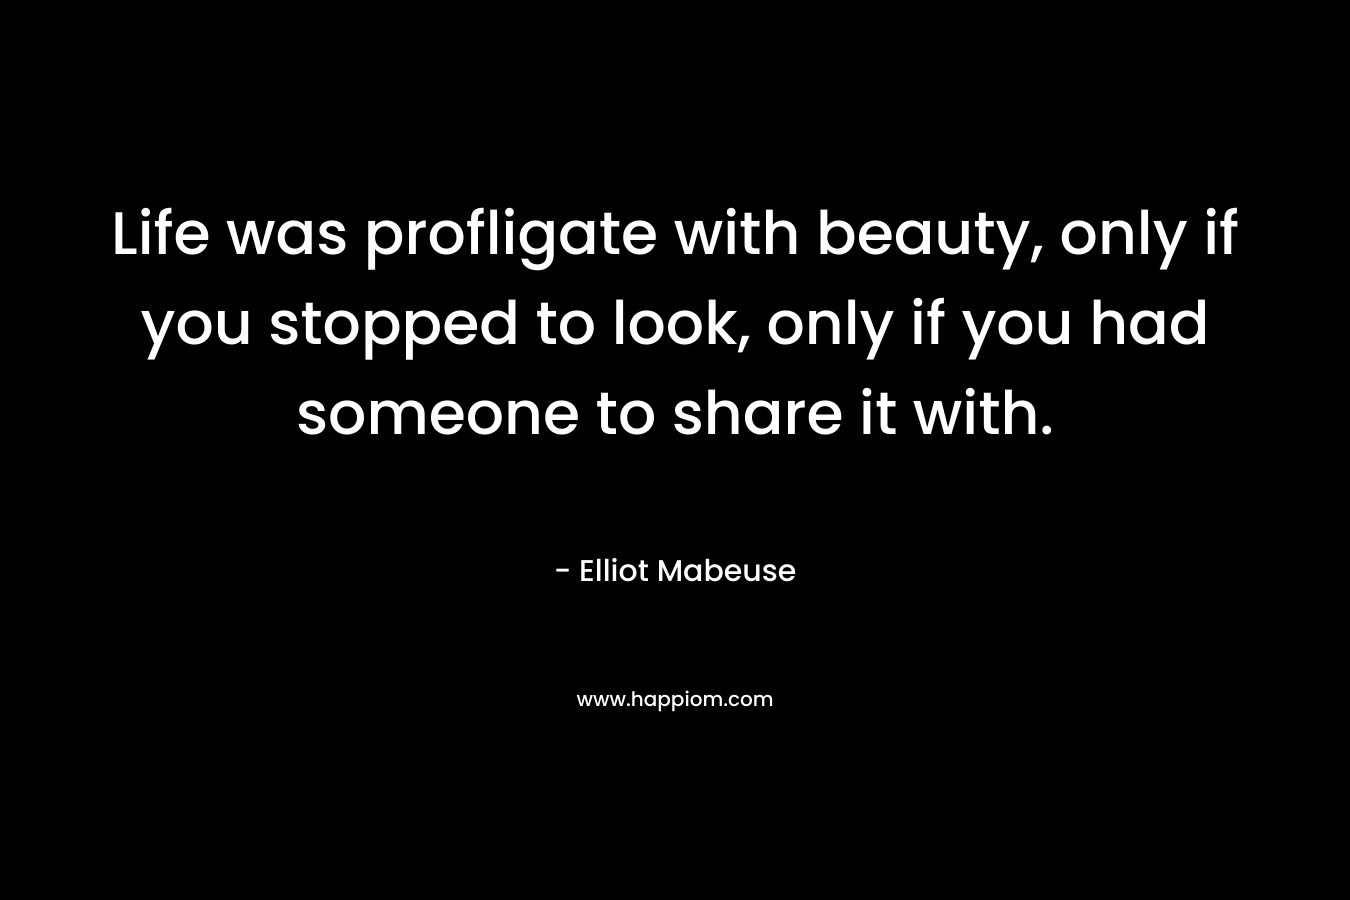 Life was profligate with beauty, only if you stopped to look, only if you had someone to share it with. – Elliot Mabeuse